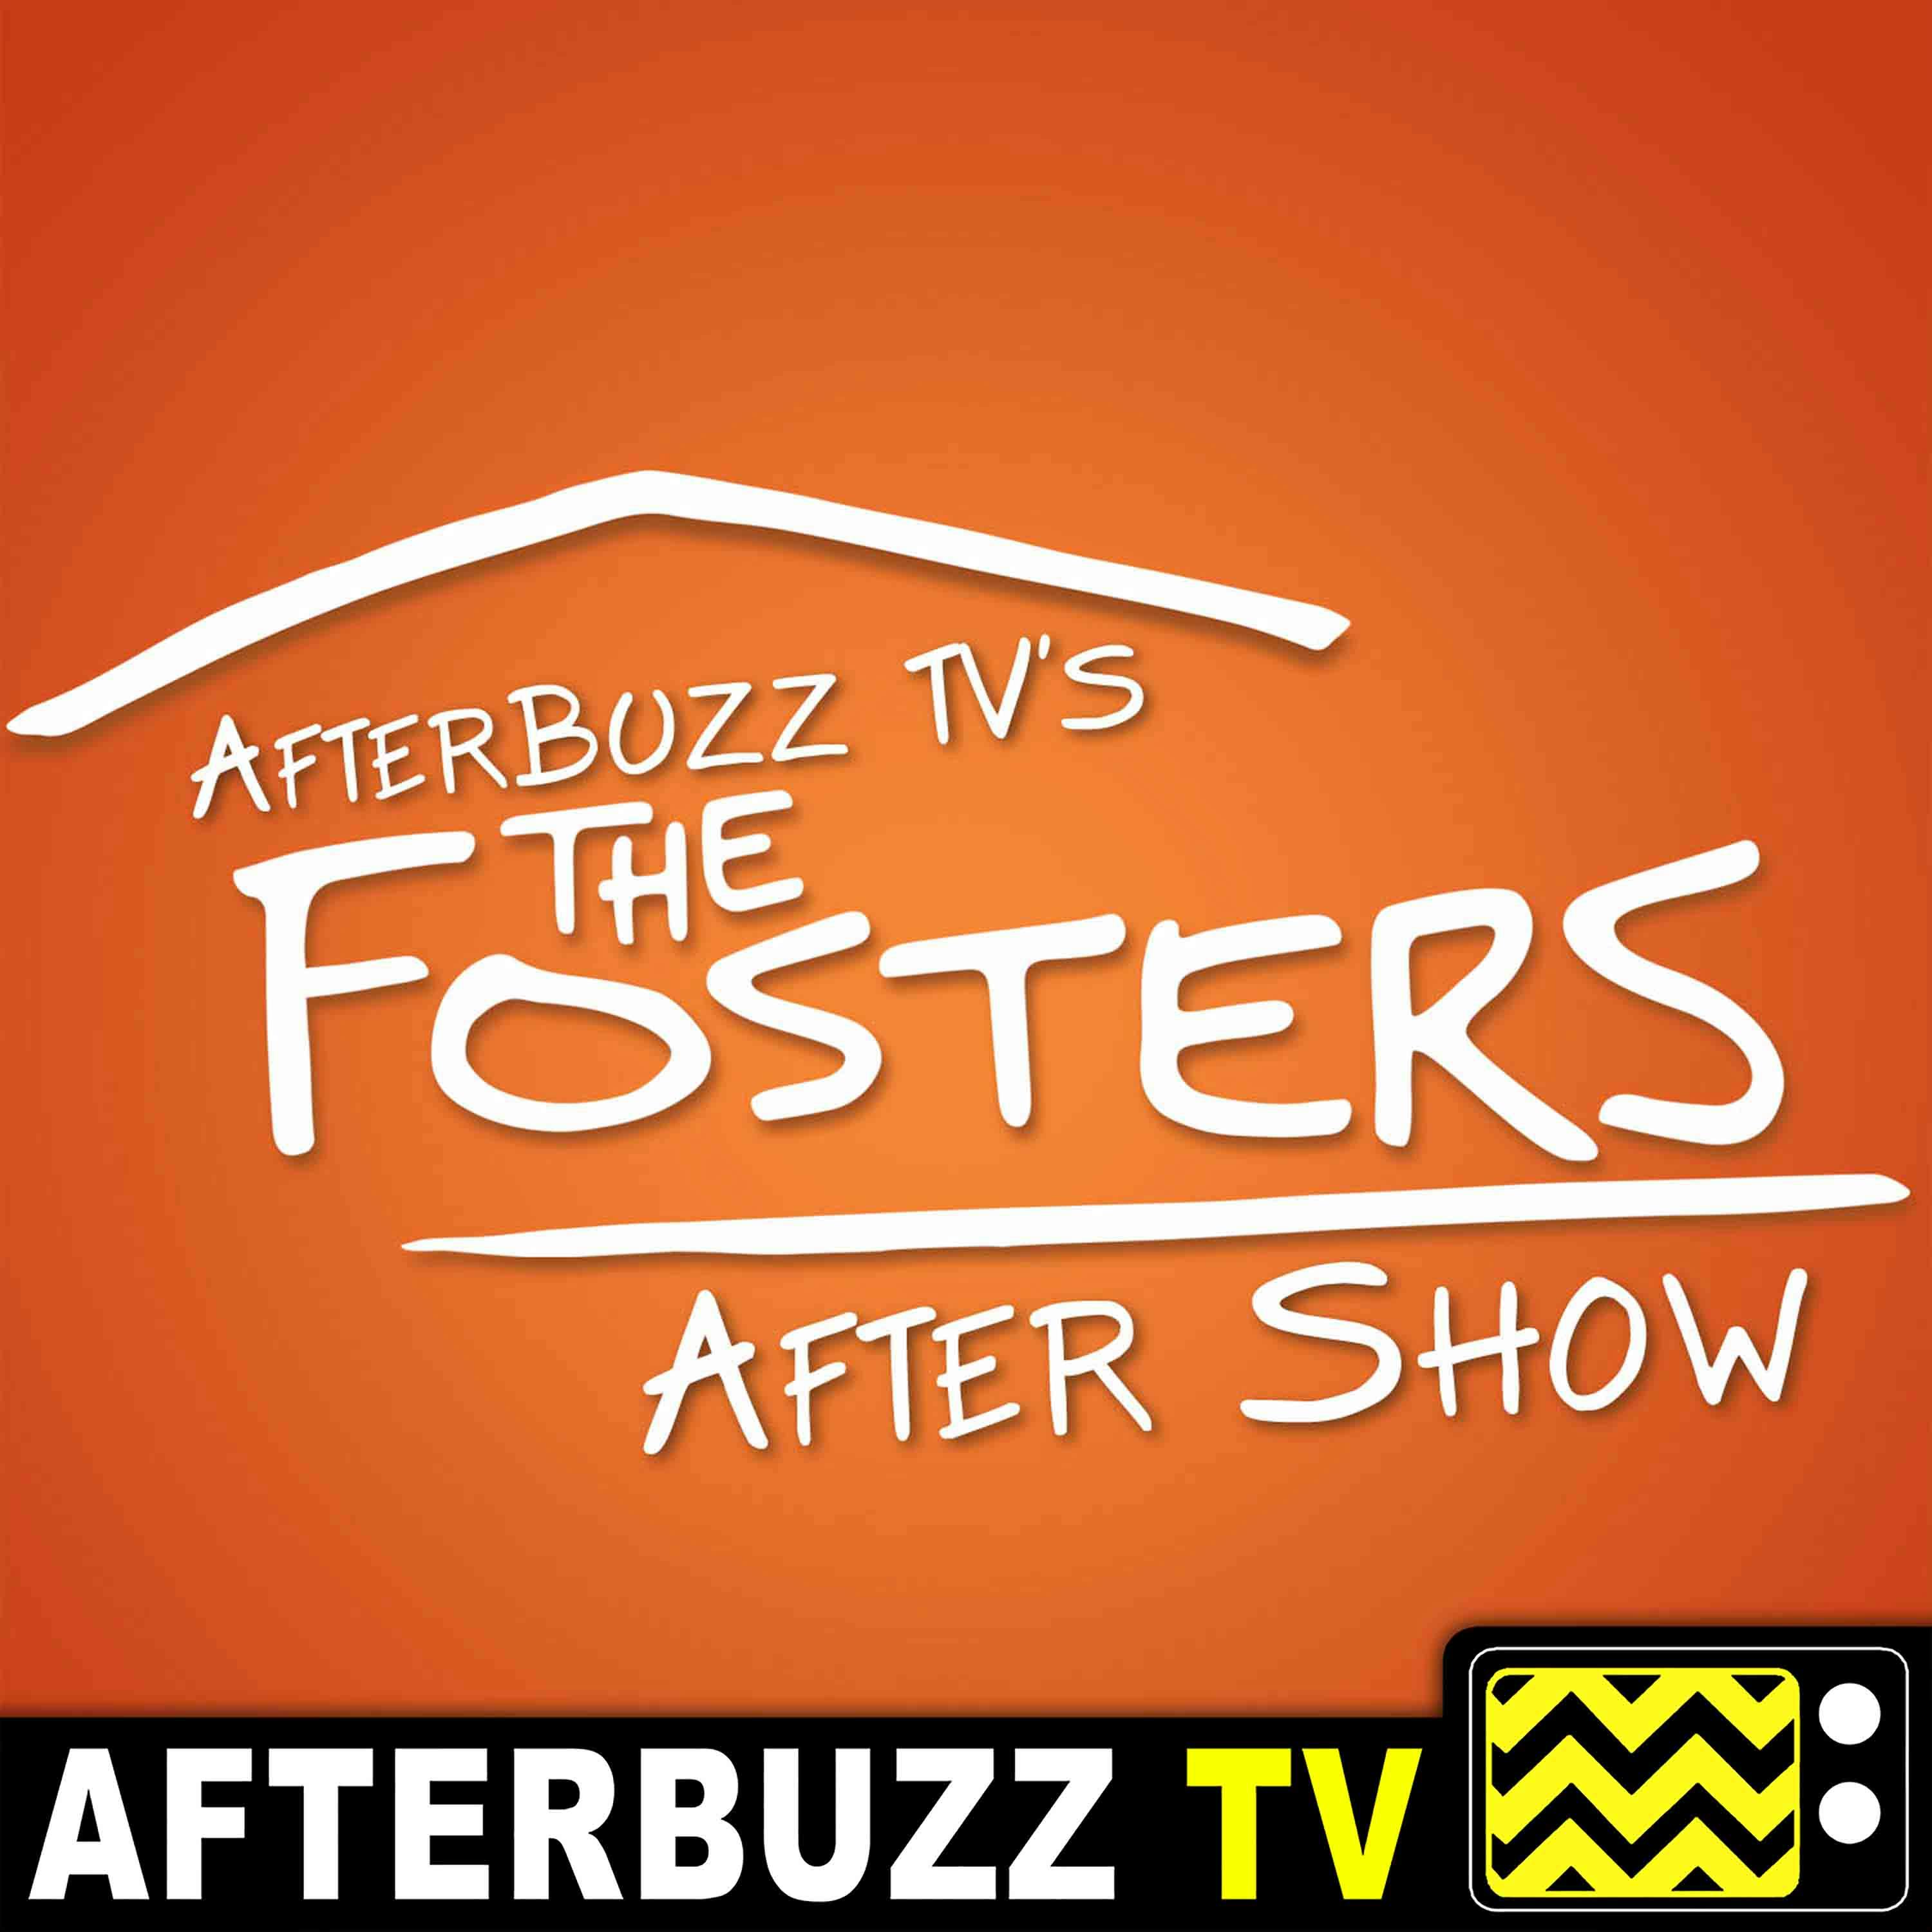 The Fosters S:2 | Chris Downey Guests on Leaky Faucets E:9 | AfterBuzz TV AfterShow